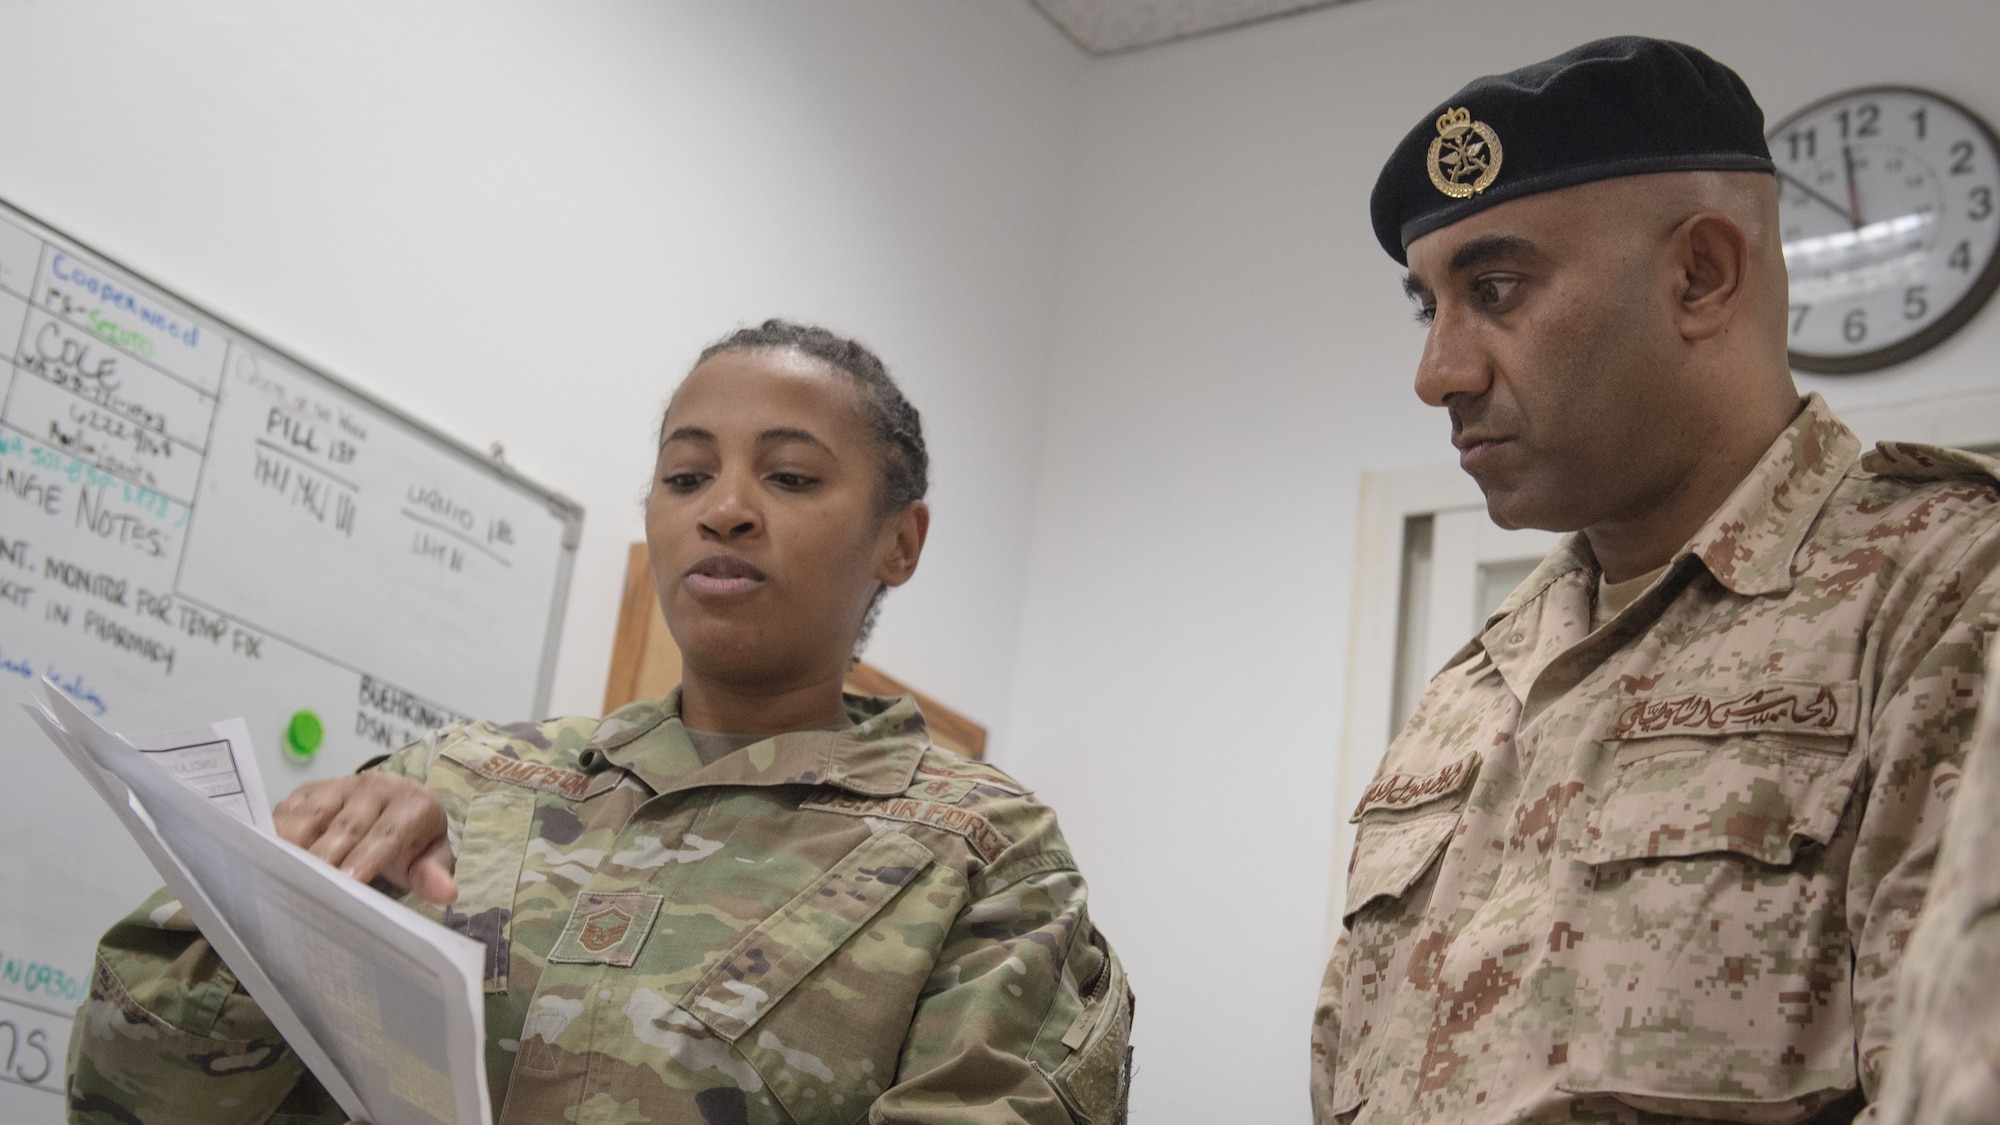 U.S. Air Force Master Sgt. Yaneesa Simpson, 386th Expeditionary Medical Group medical technician, explains the 9-line medevac request process to Kuwait army Col. Nawaf Jandoul Al-Dousari, North Military Medical Complex director, during his tour of the 386th EMDG clinic at Ali Al Salem Air Base, Kuwait, Oct. 16, 2019. The Kuwait army directors of the North Military Medical Complex visited the 386th EMDG clinic to tour the facility, share ideas on improving medical care and discuss strengthening interoperability. (U.S. Air Force photo by Tech. Sgt. Daniel Martinez)